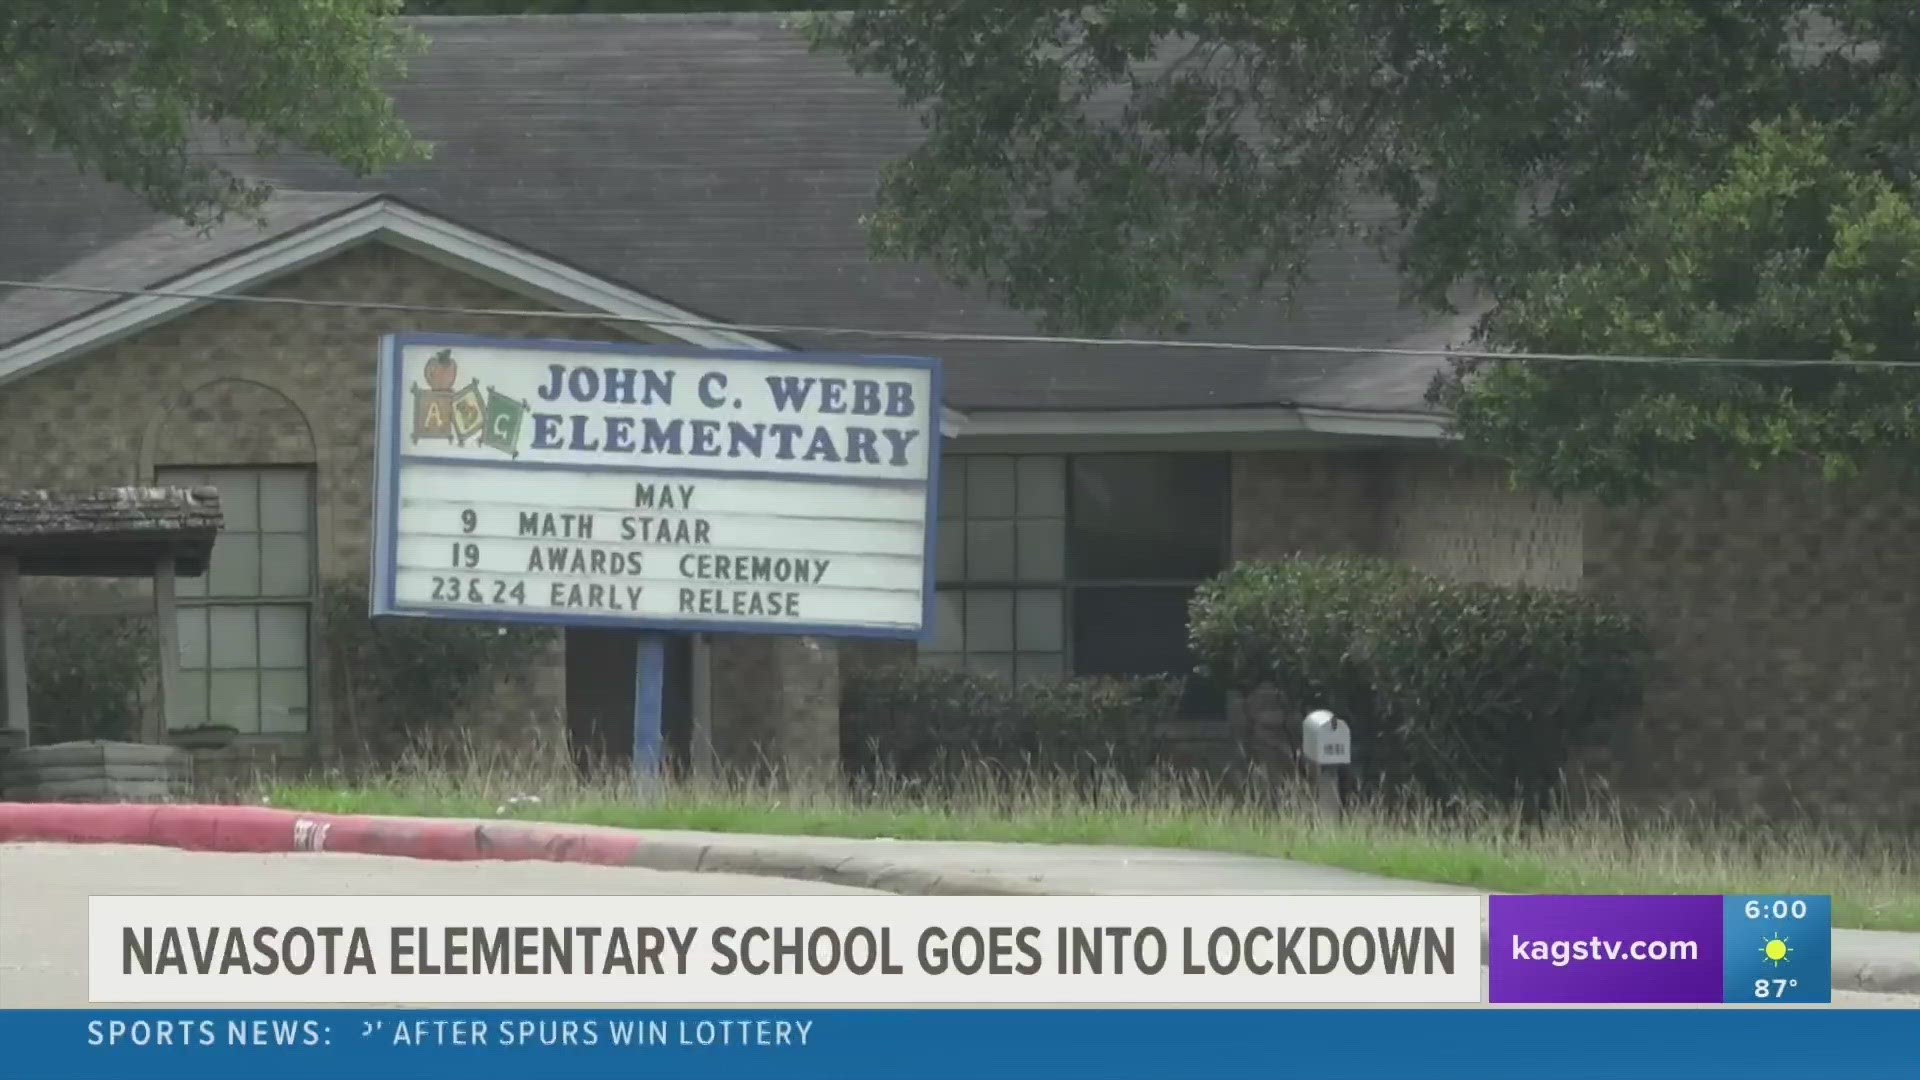 What was reported as a "prank on a friend" prompted two elementary school lockdowns in Navasota Tuesday morning, according to police.